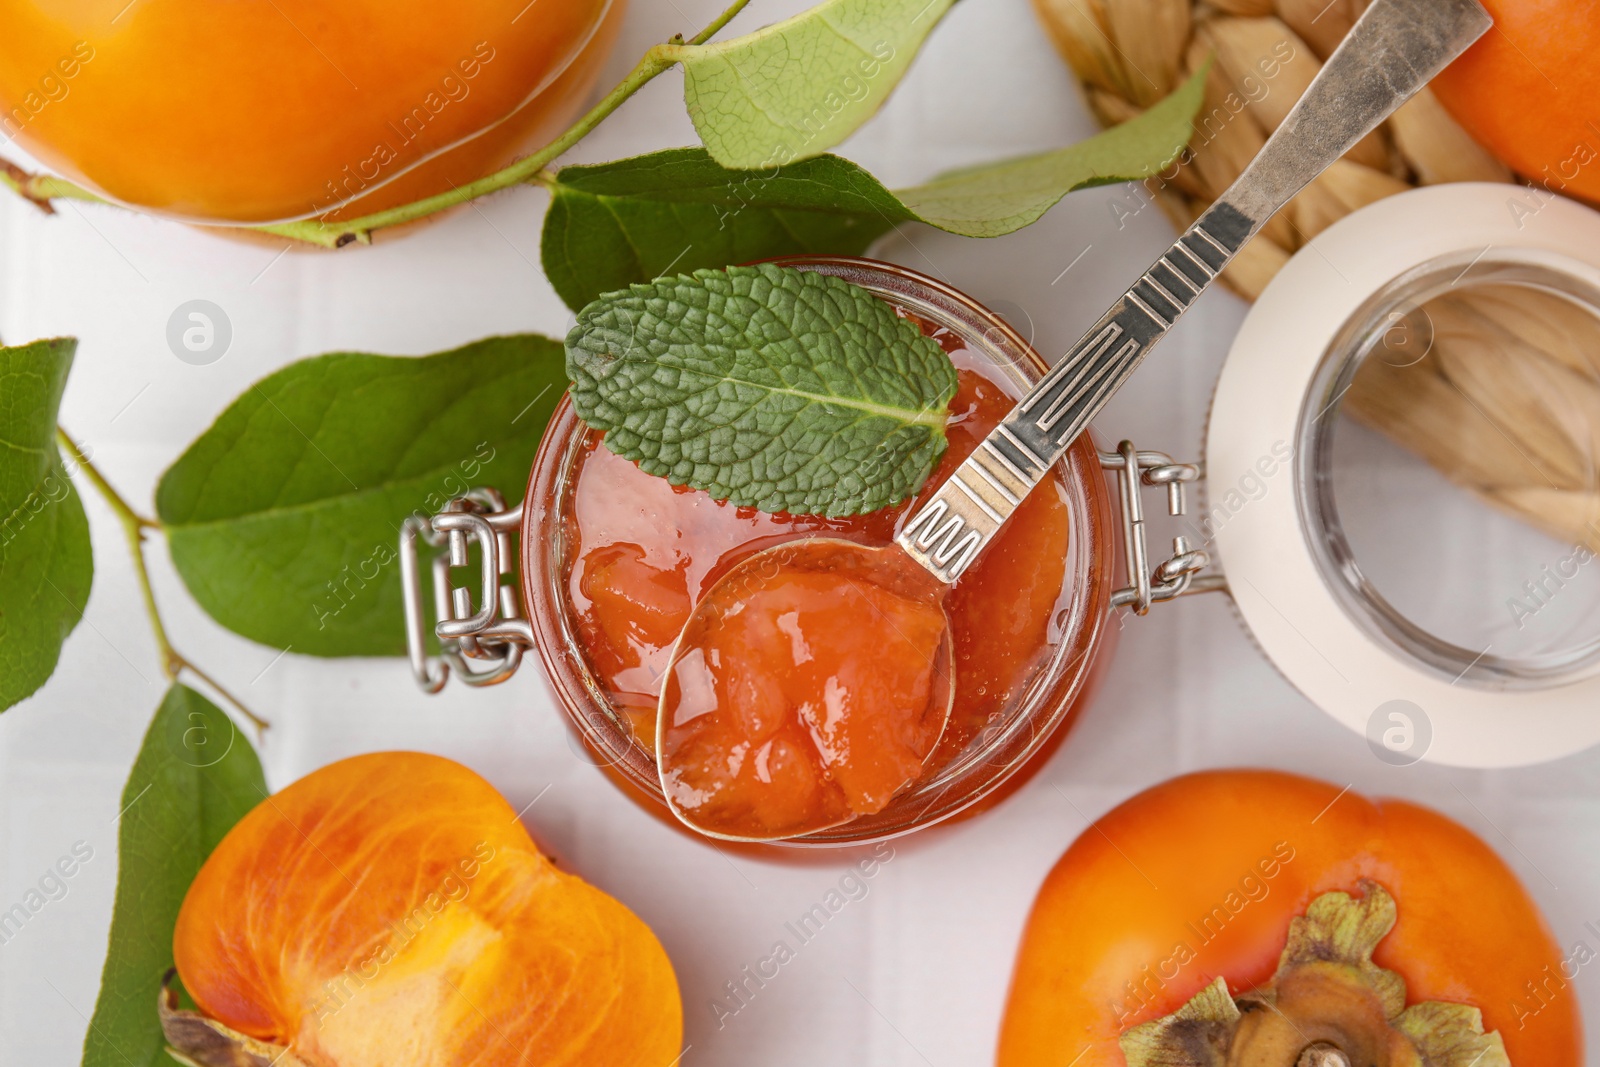 Photo of Jar and spoon of tasty persimmon jam, ingredients on white tiled table, flat lay